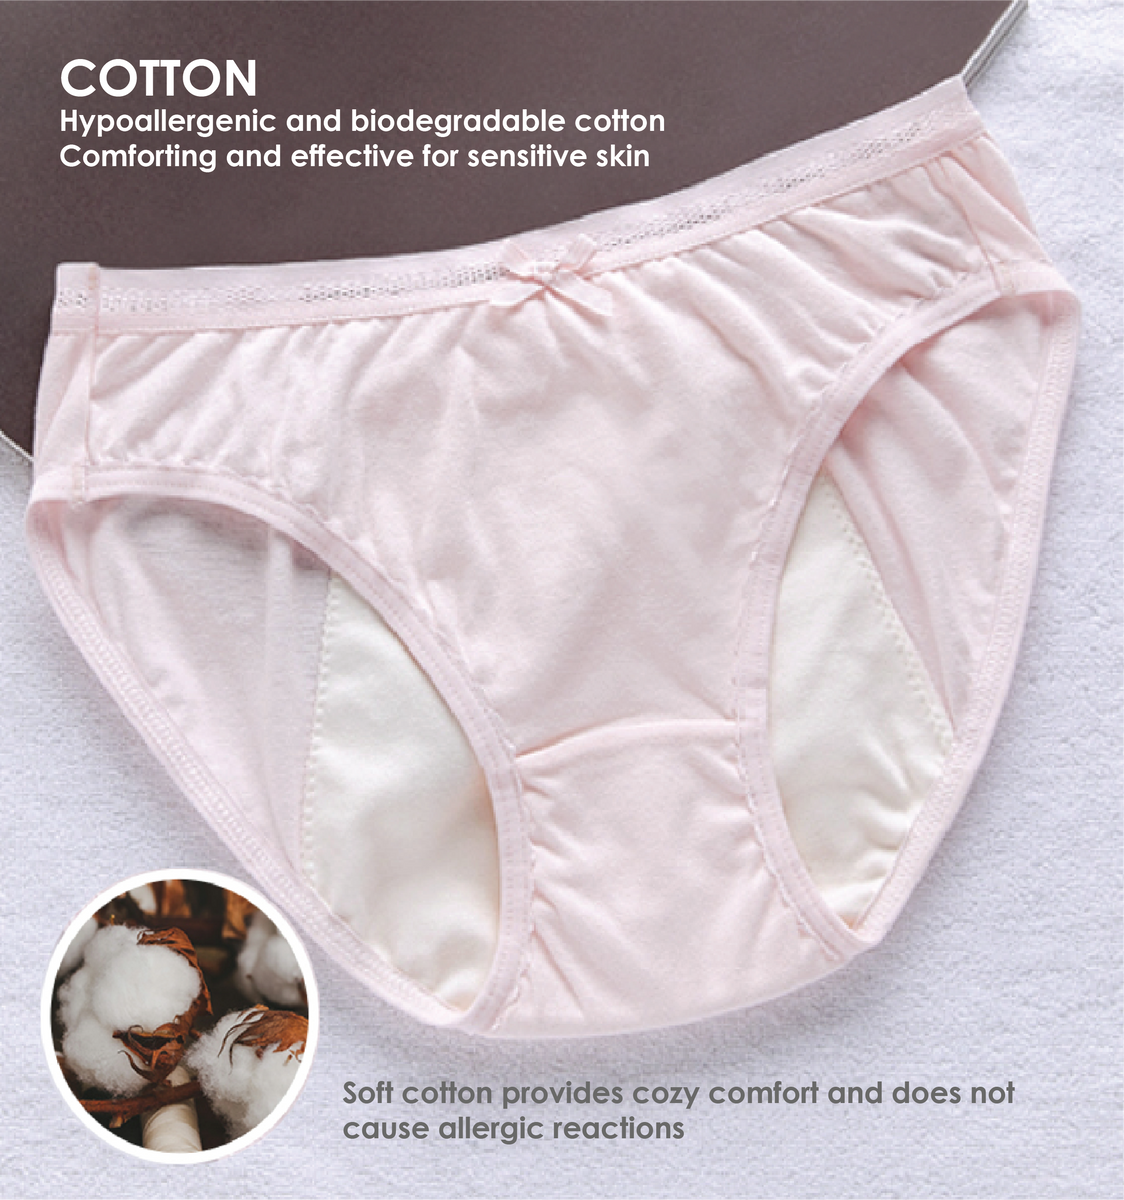 H.O.W Organic Cotton Period Panty – Her own words